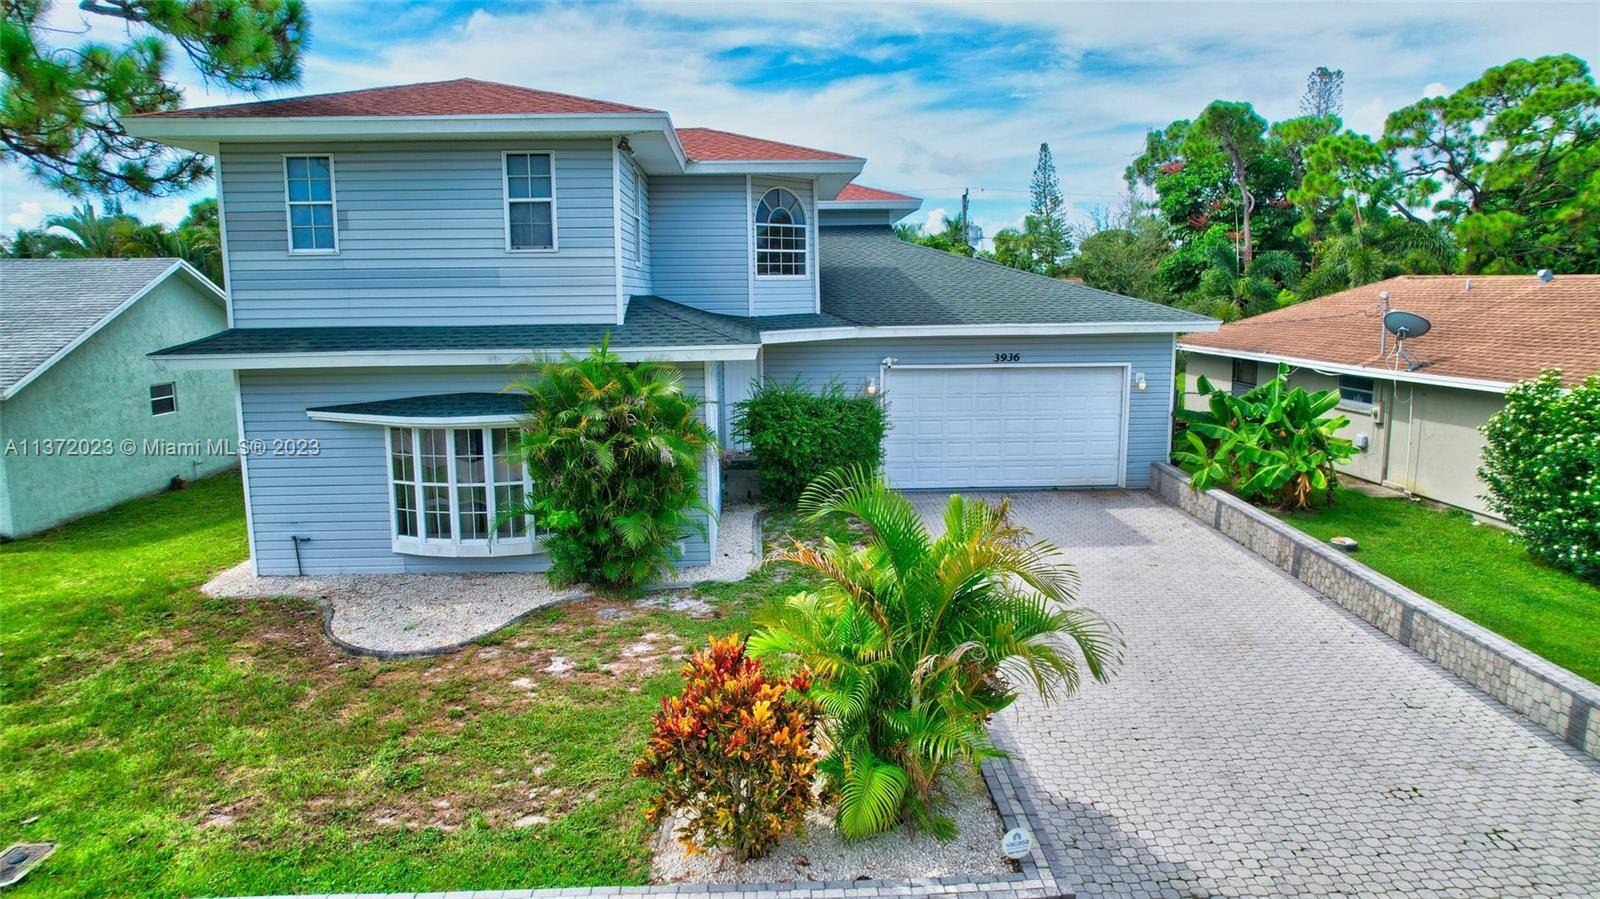 Luxurious home close to the beach perfect for family vacations !